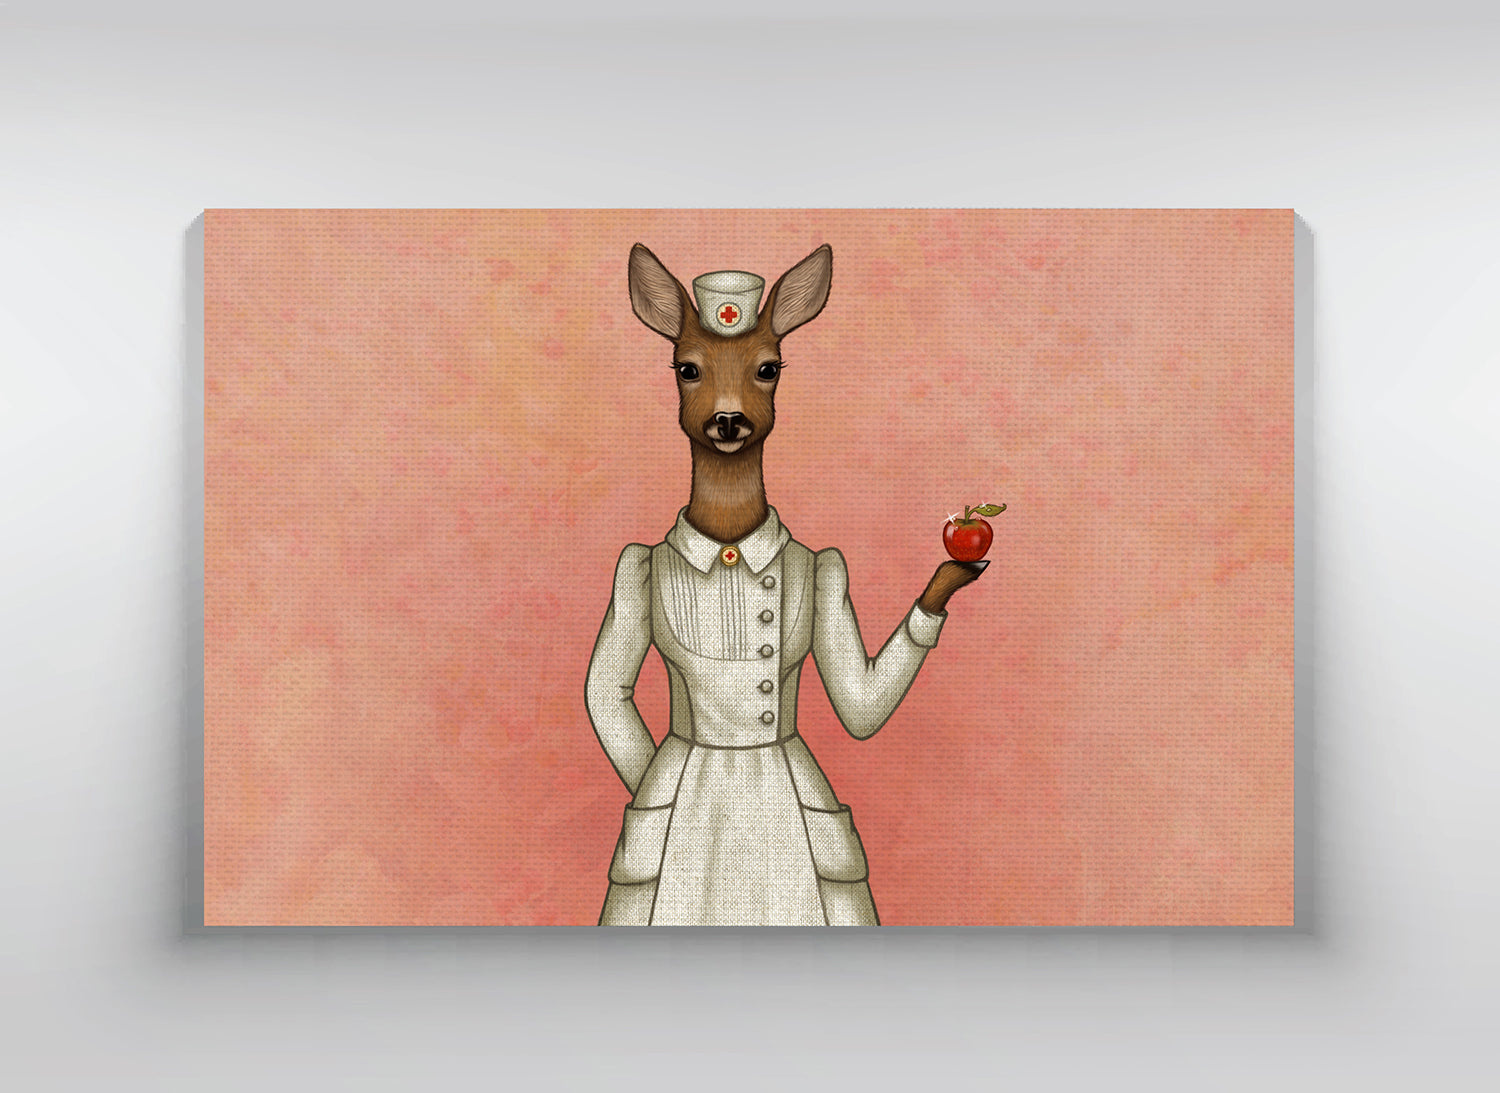 Canvas "An apple a day keeps the doctor away" (Deer)